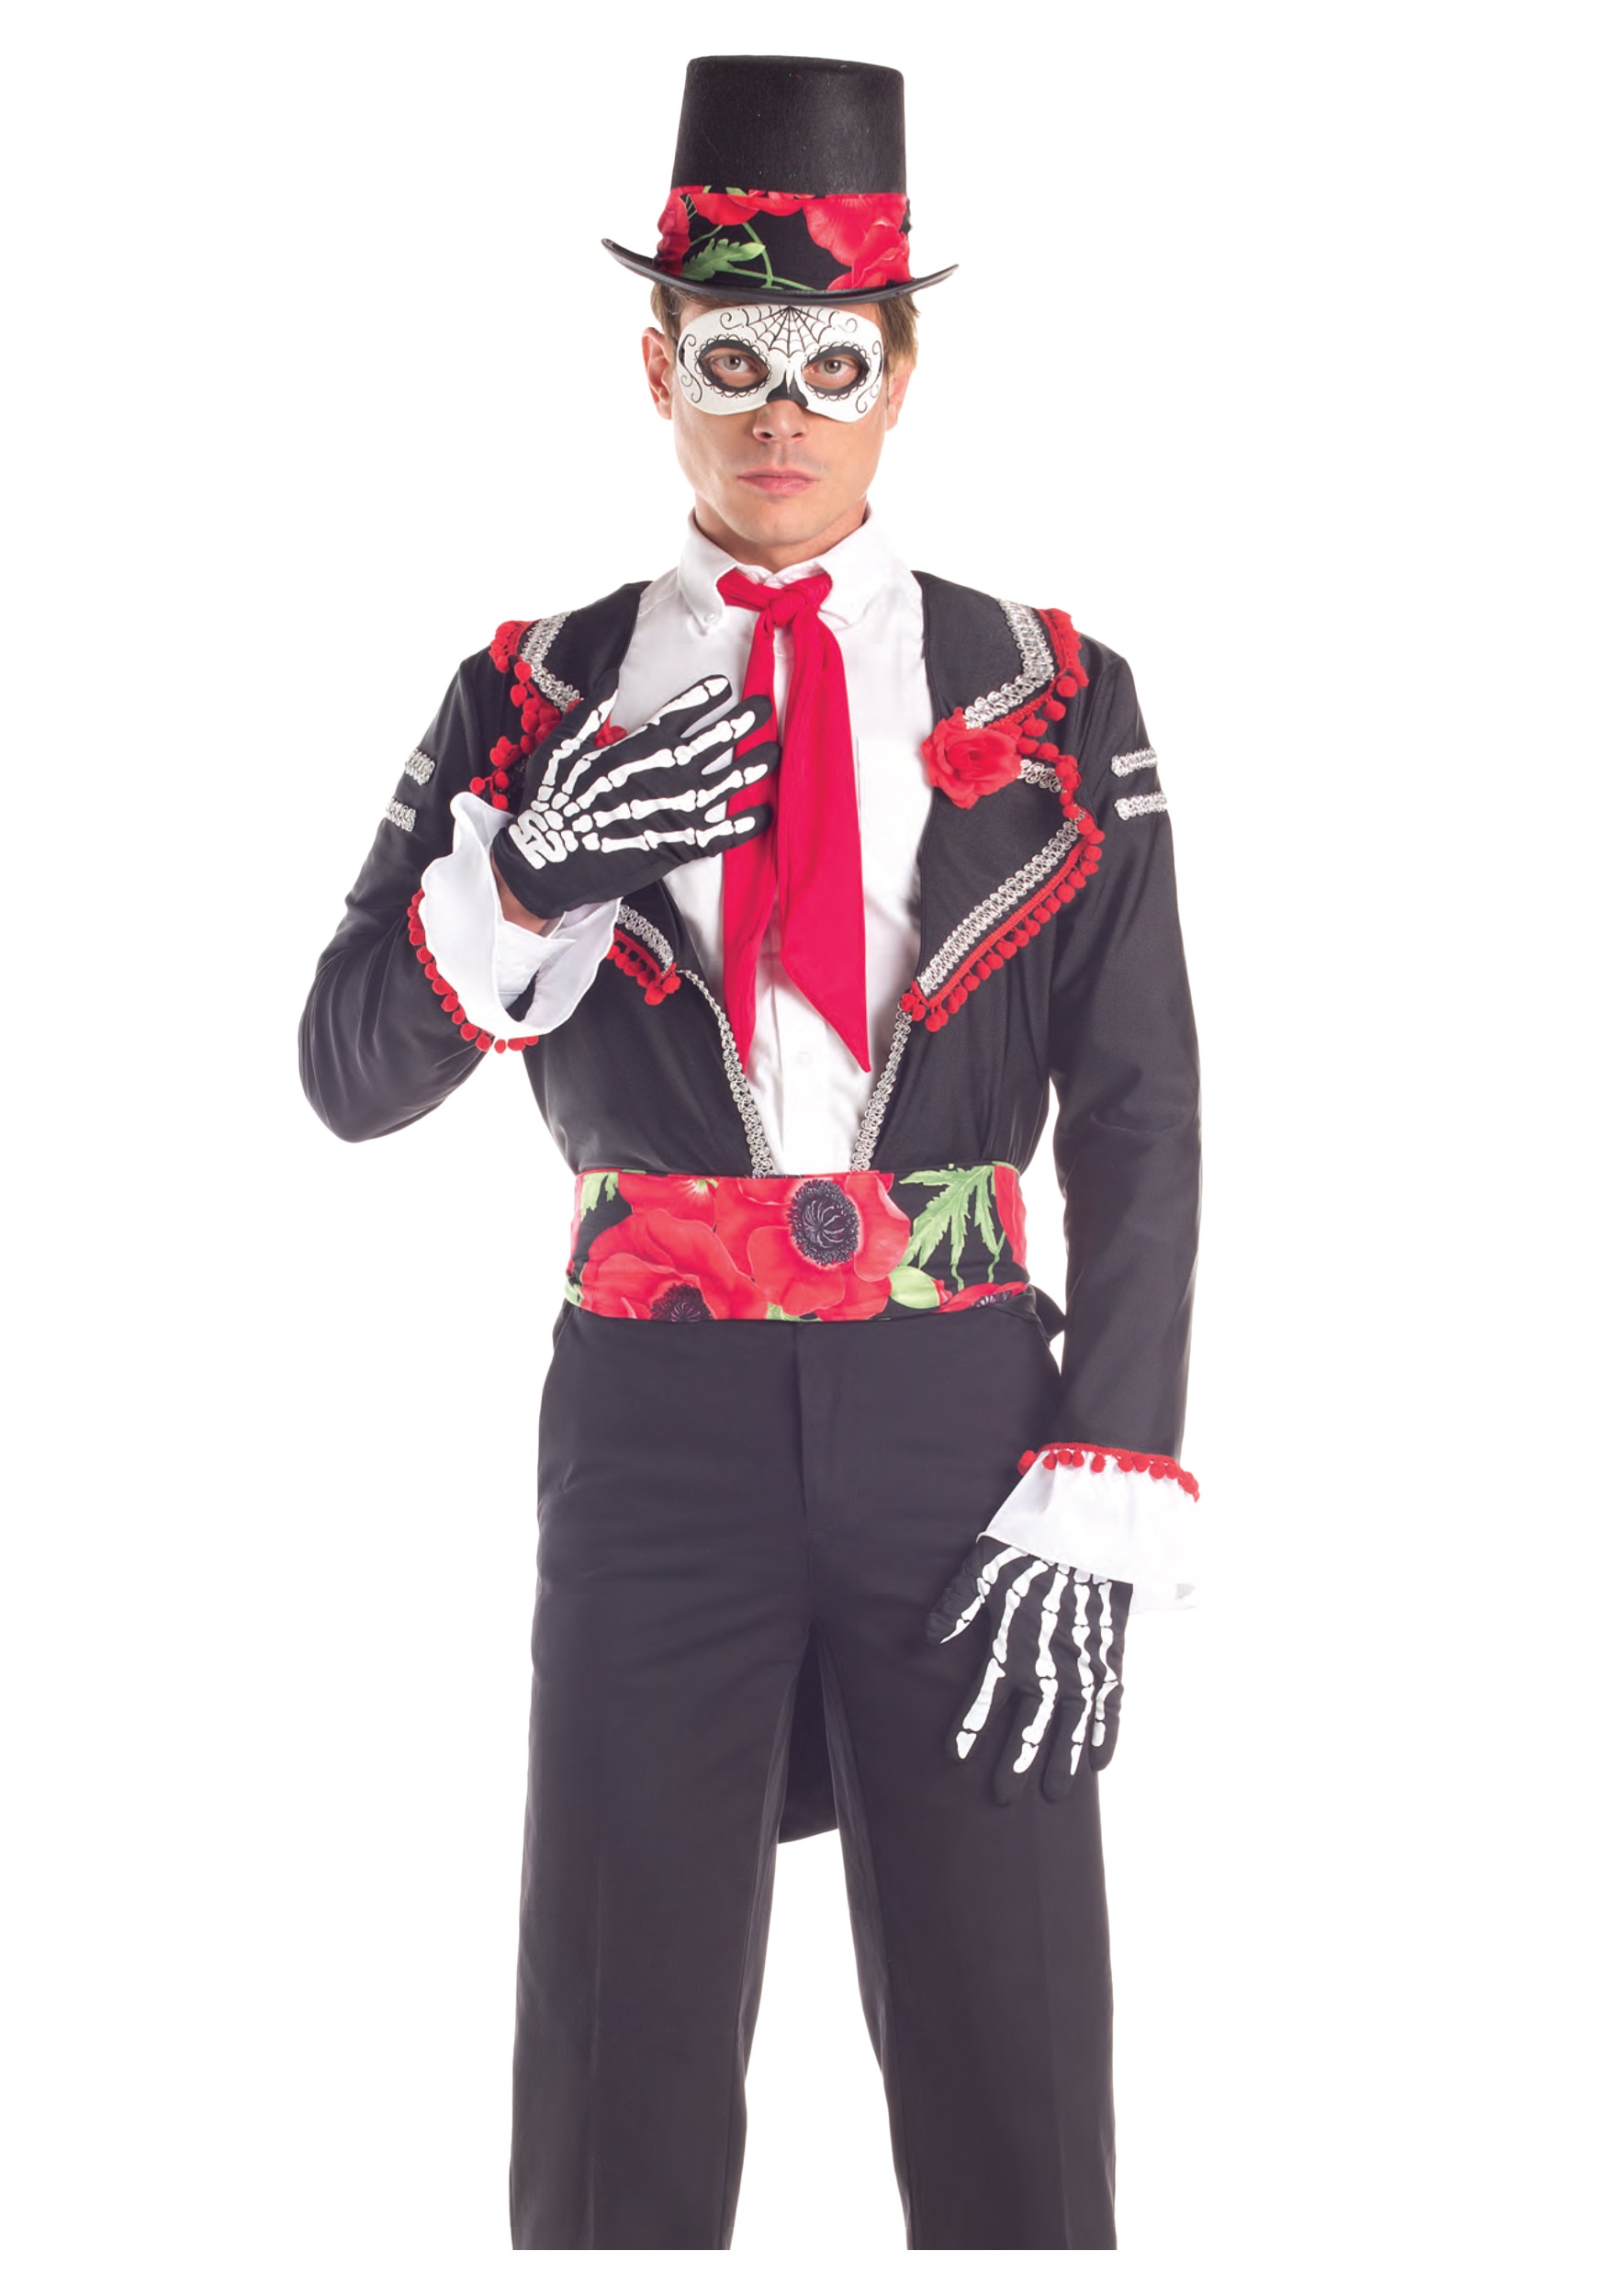 Image of Day of the Dead Adult Costume ID PKPK313-S/M